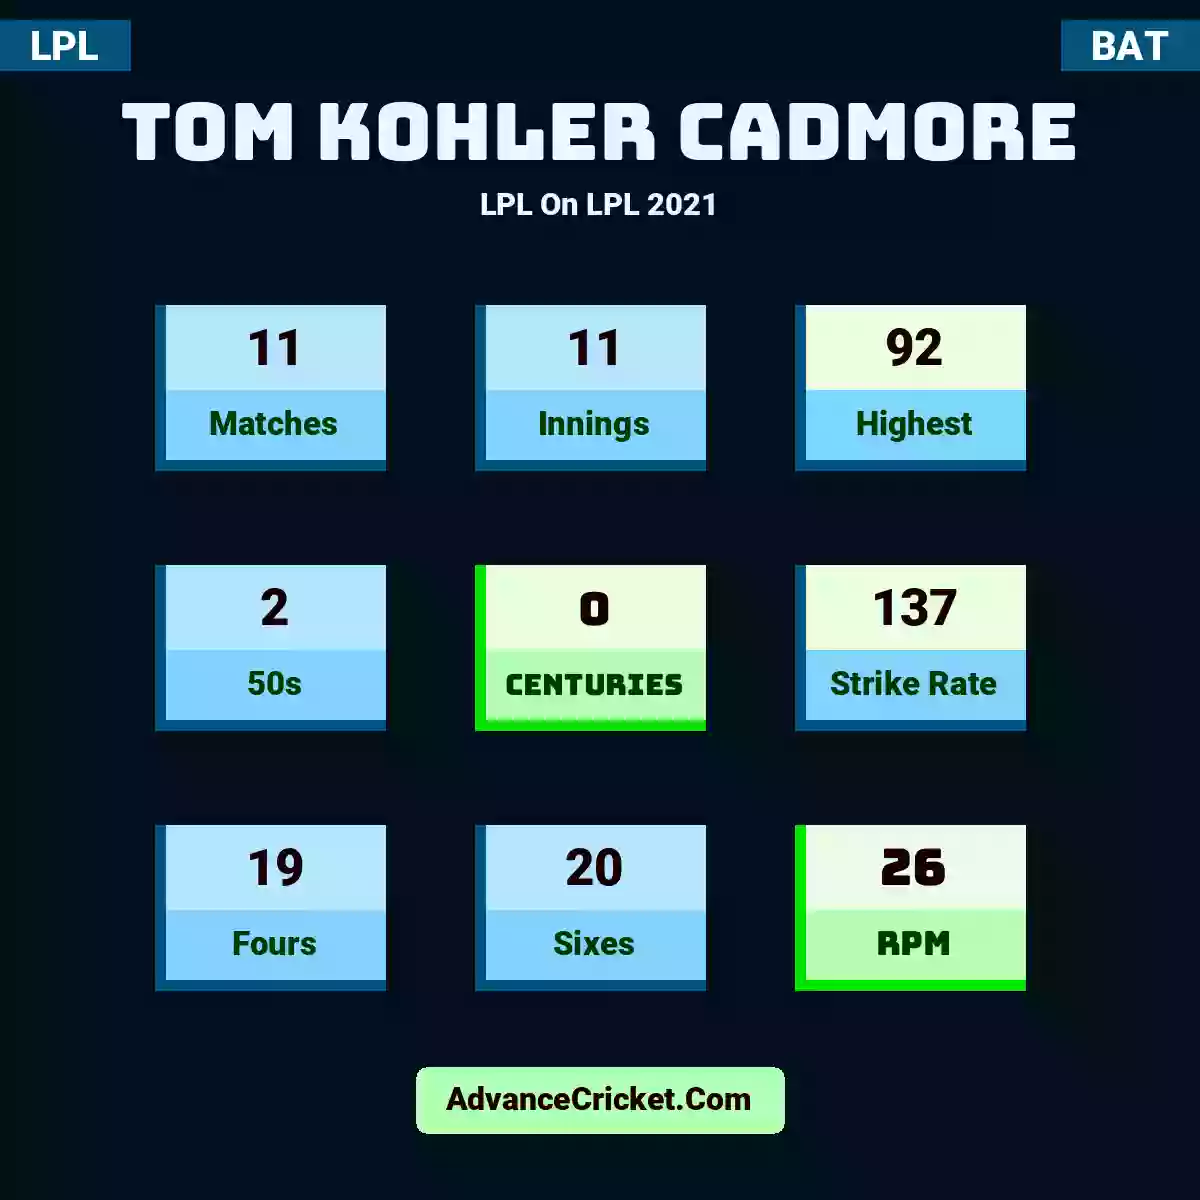 Tom Kohler Cadmore LPL  On LPL 2021, Tom Kohler Cadmore played 11 matches, scored 92 runs as highest, 2 half-centuries, and 0 centuries, with a strike rate of 137. T.Cadmore hit 19 fours and 20 sixes, with an RPM of 26.